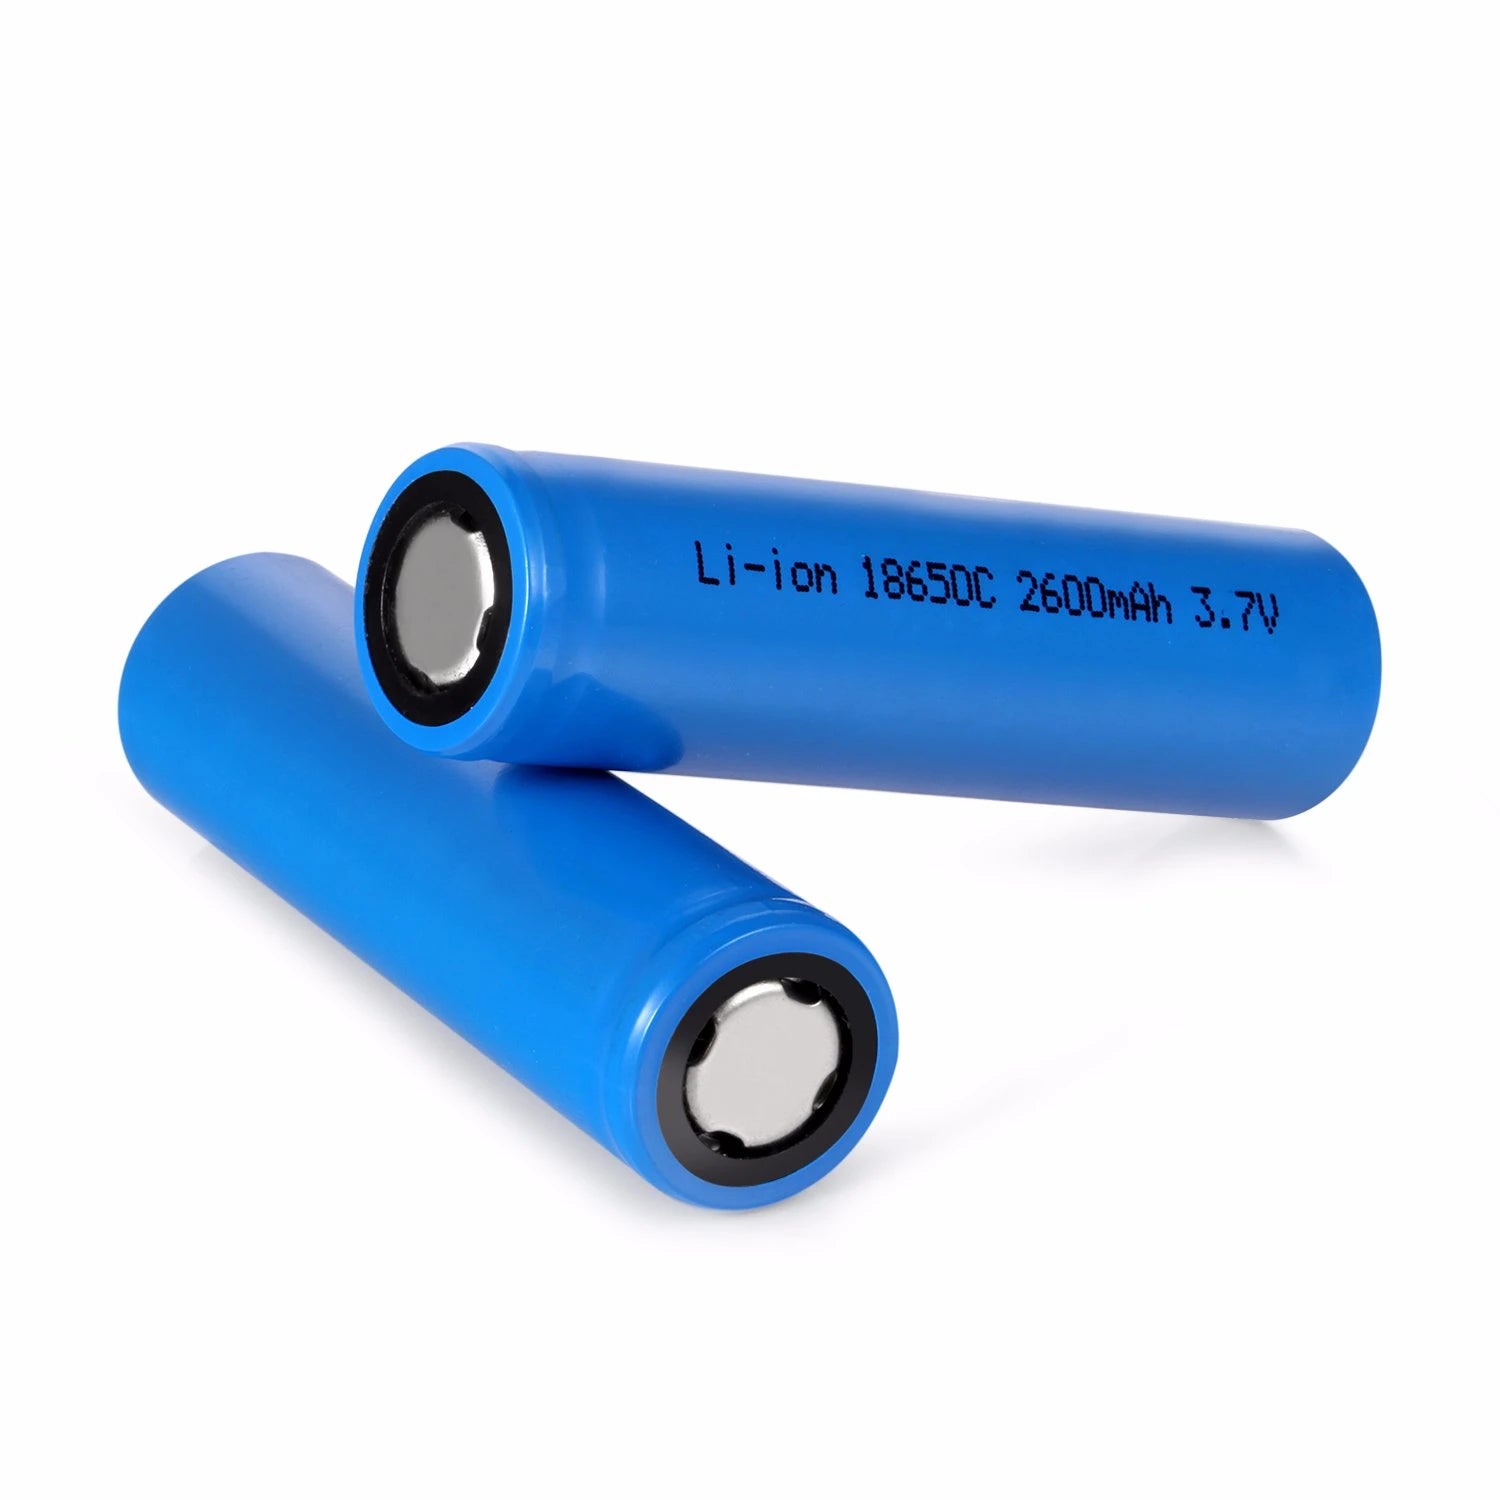 Rechargeable Li-Ion battery Icr 18650 2600mAh 3.7V - 7.4V Battery Pack insideFPV Batteries and Chargers Lithium-Ion Battery